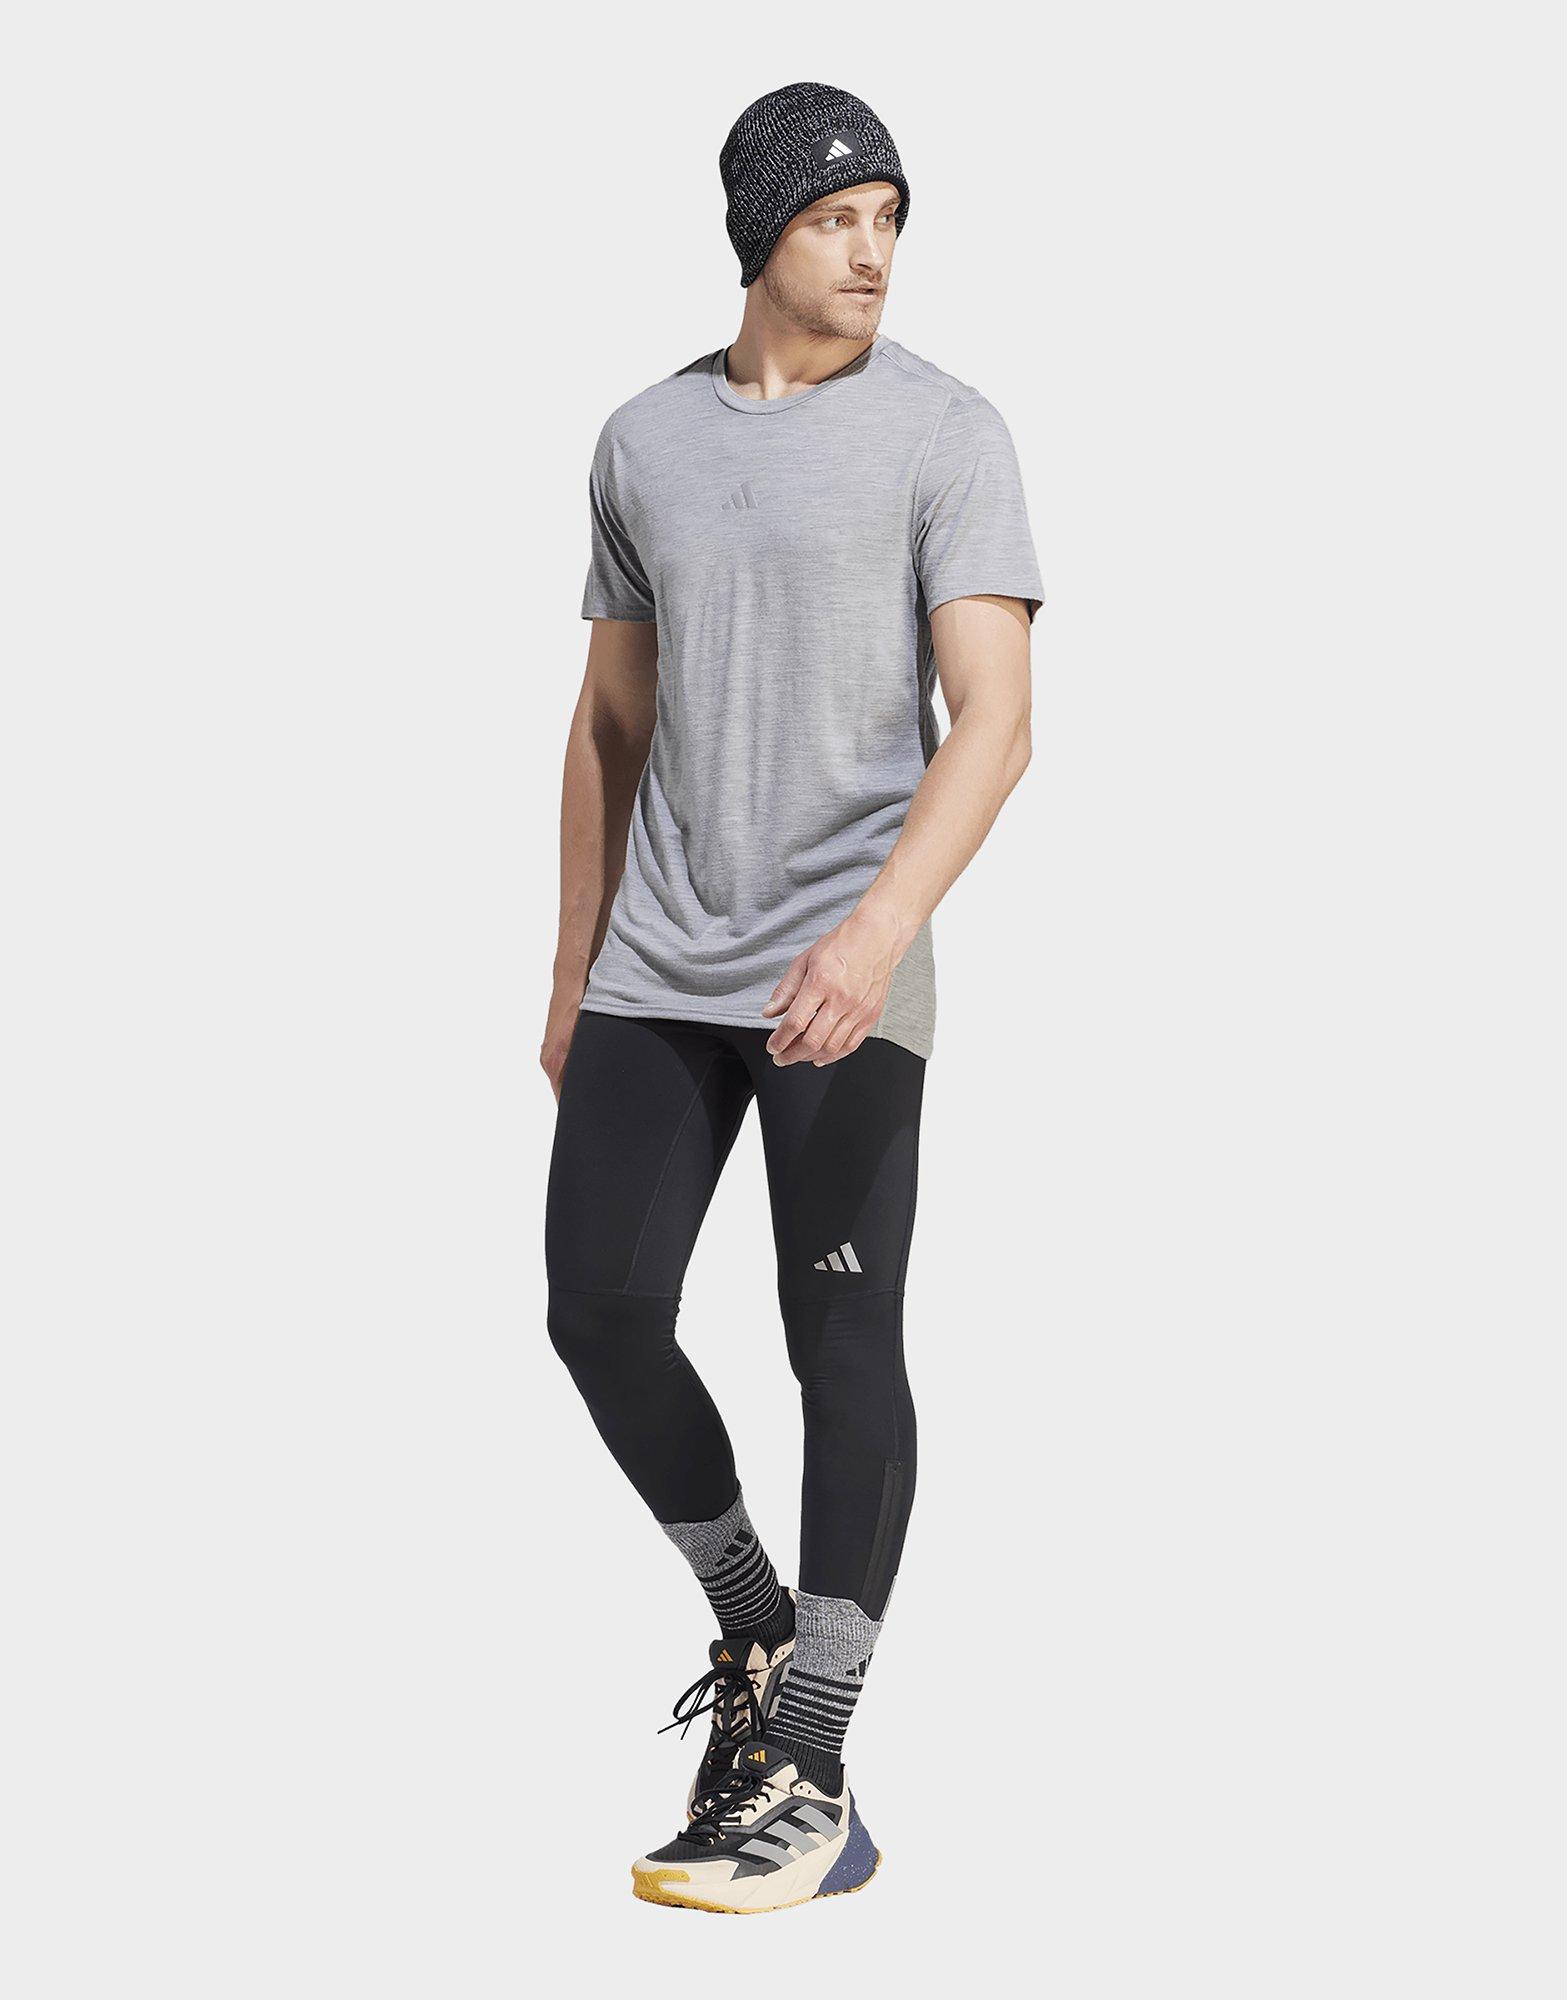 Black adidas Ultimate Running Conquer the Elements AEROREADY Warming  Leggings